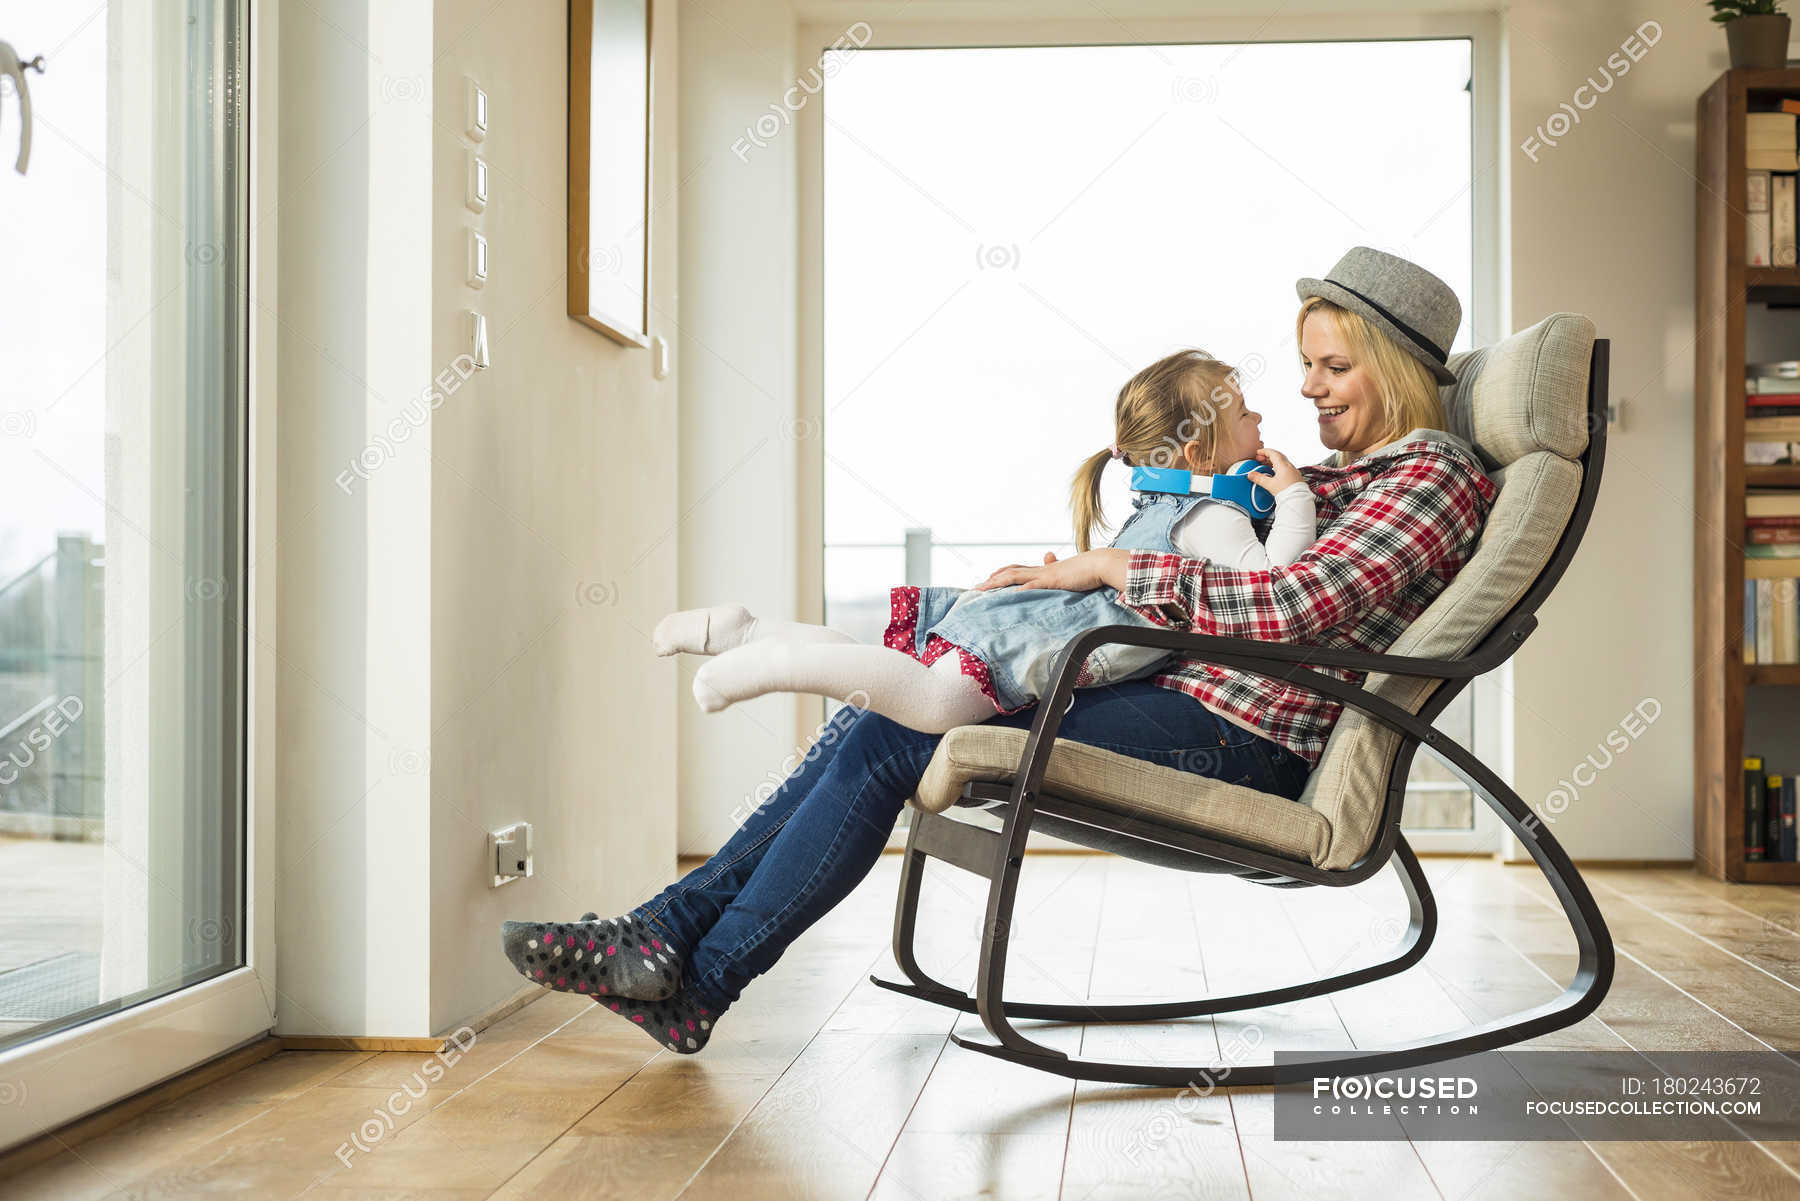 mothers rocking chair